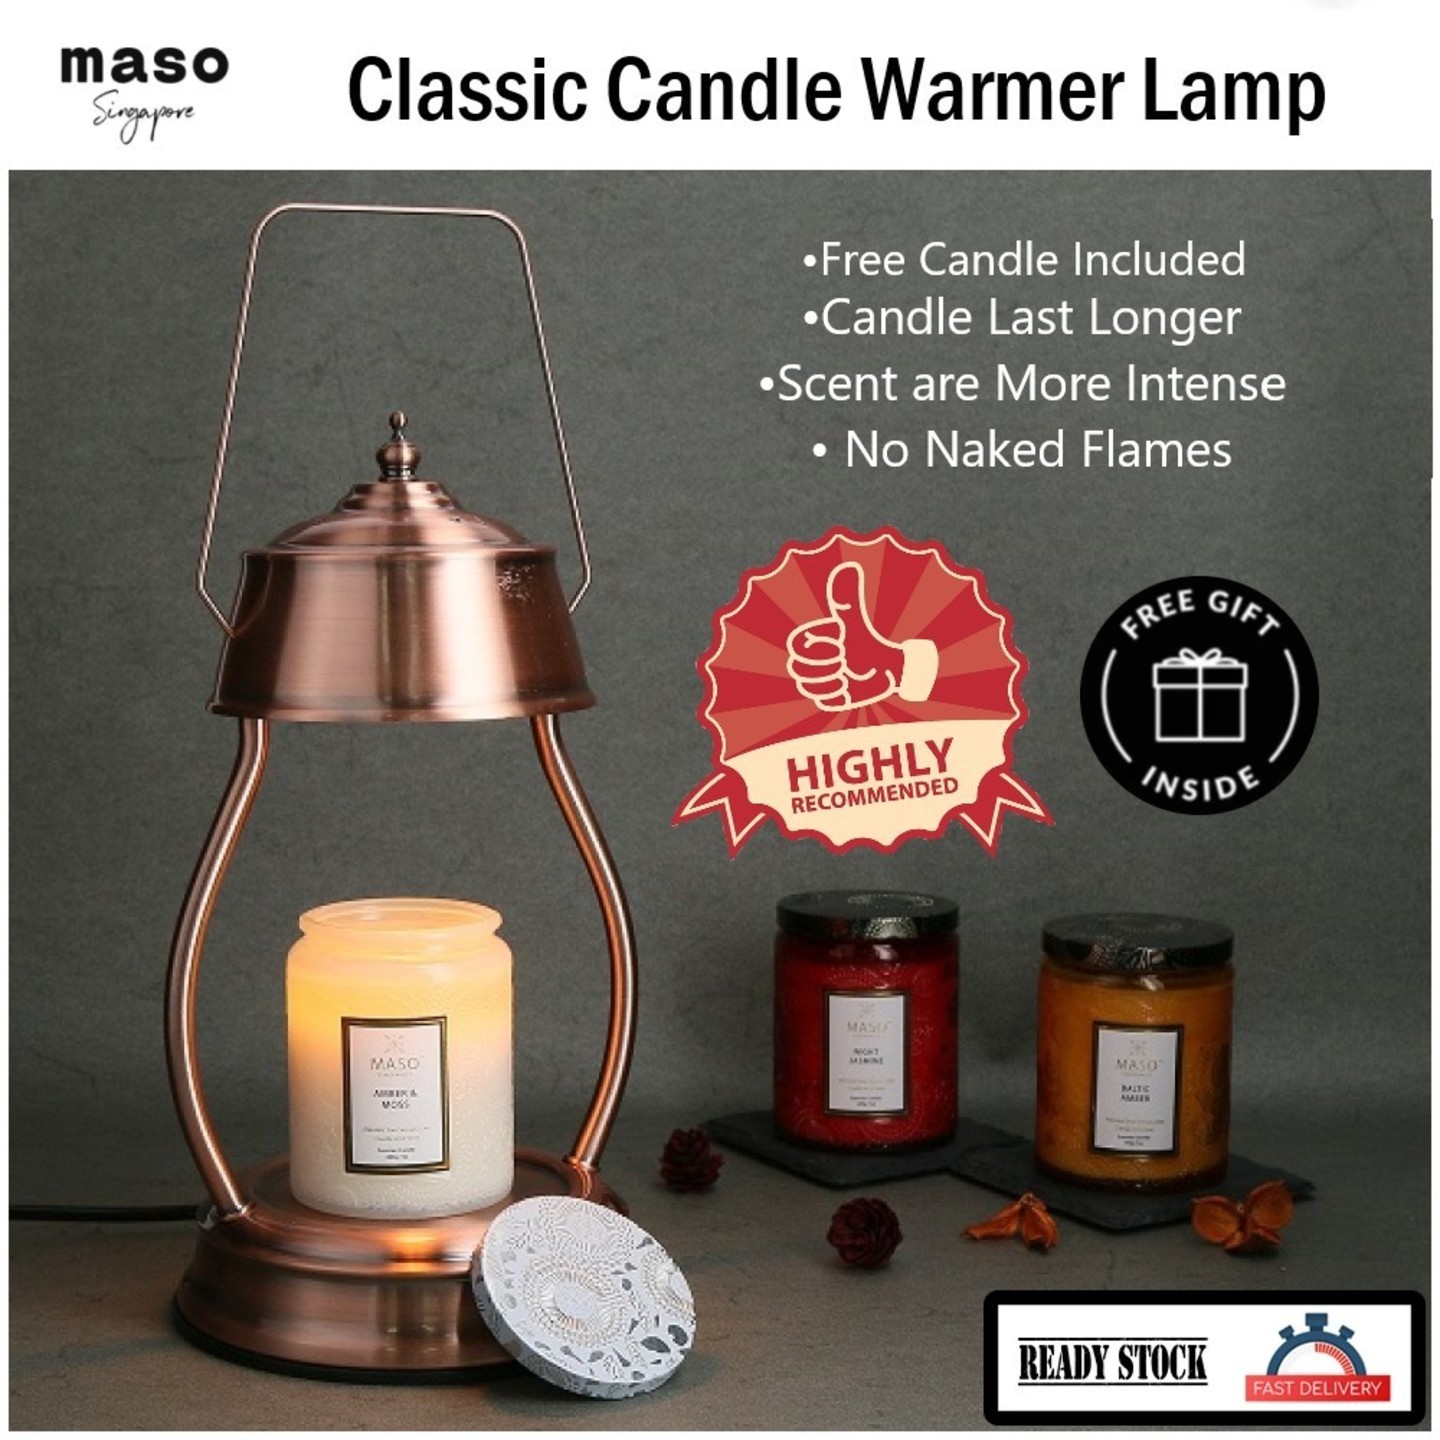 Classic Style Candle Warmer Lamp